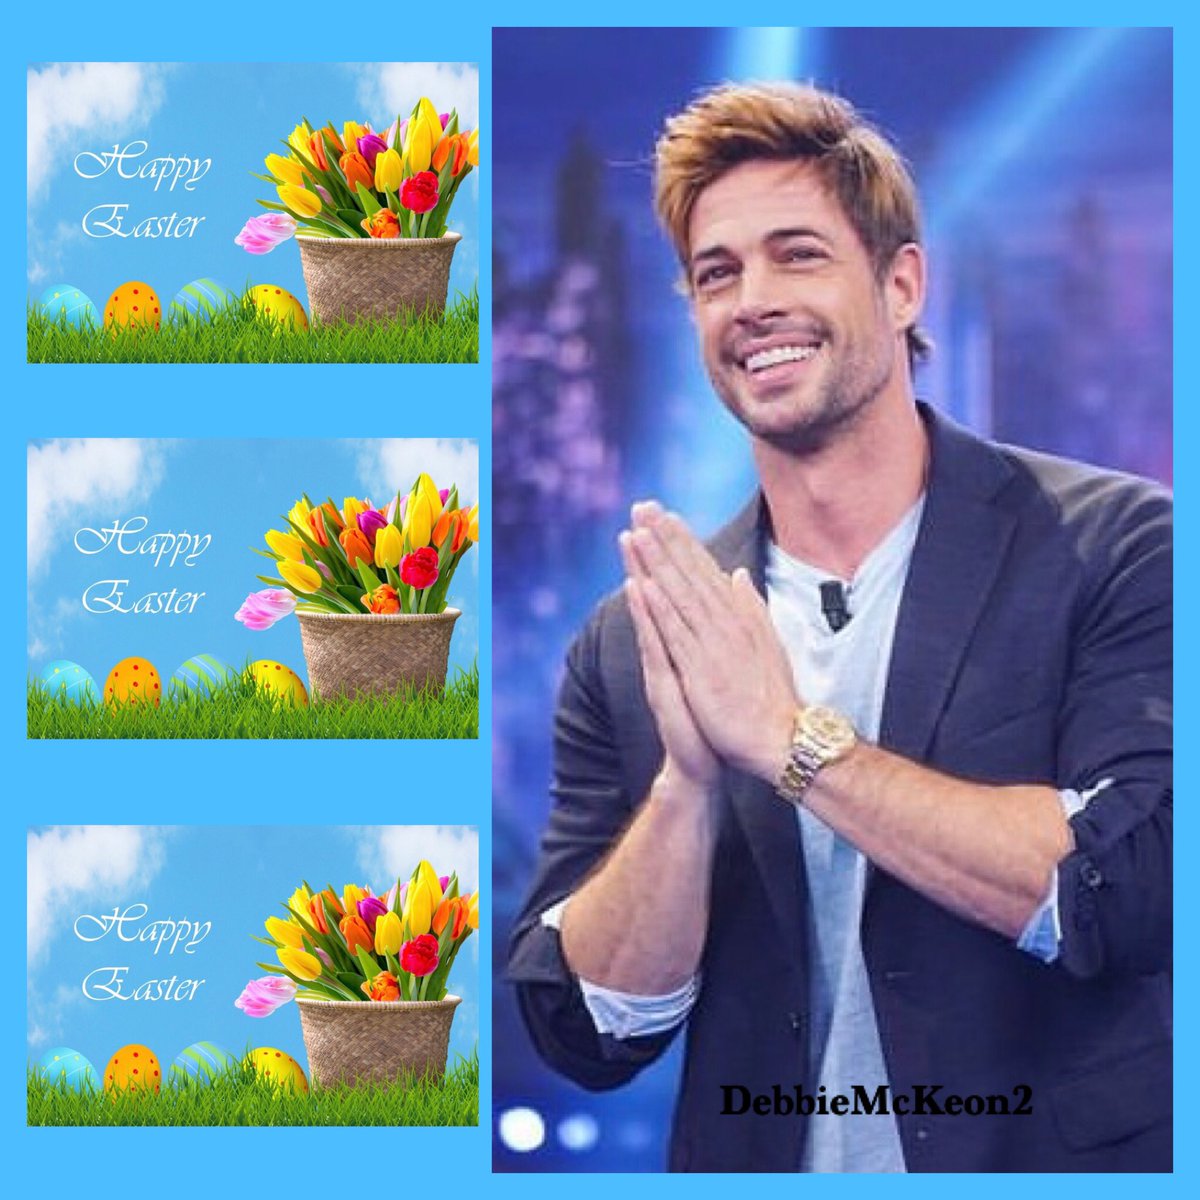 Happy Easter! 🌼🌺🐇 Have a Blessed Sunday! @willylevy29 #willevy #WilliamLevy #cojimar #satorial #LevyFans #WLW #WLWCalifornia #WilliamLevyWorld